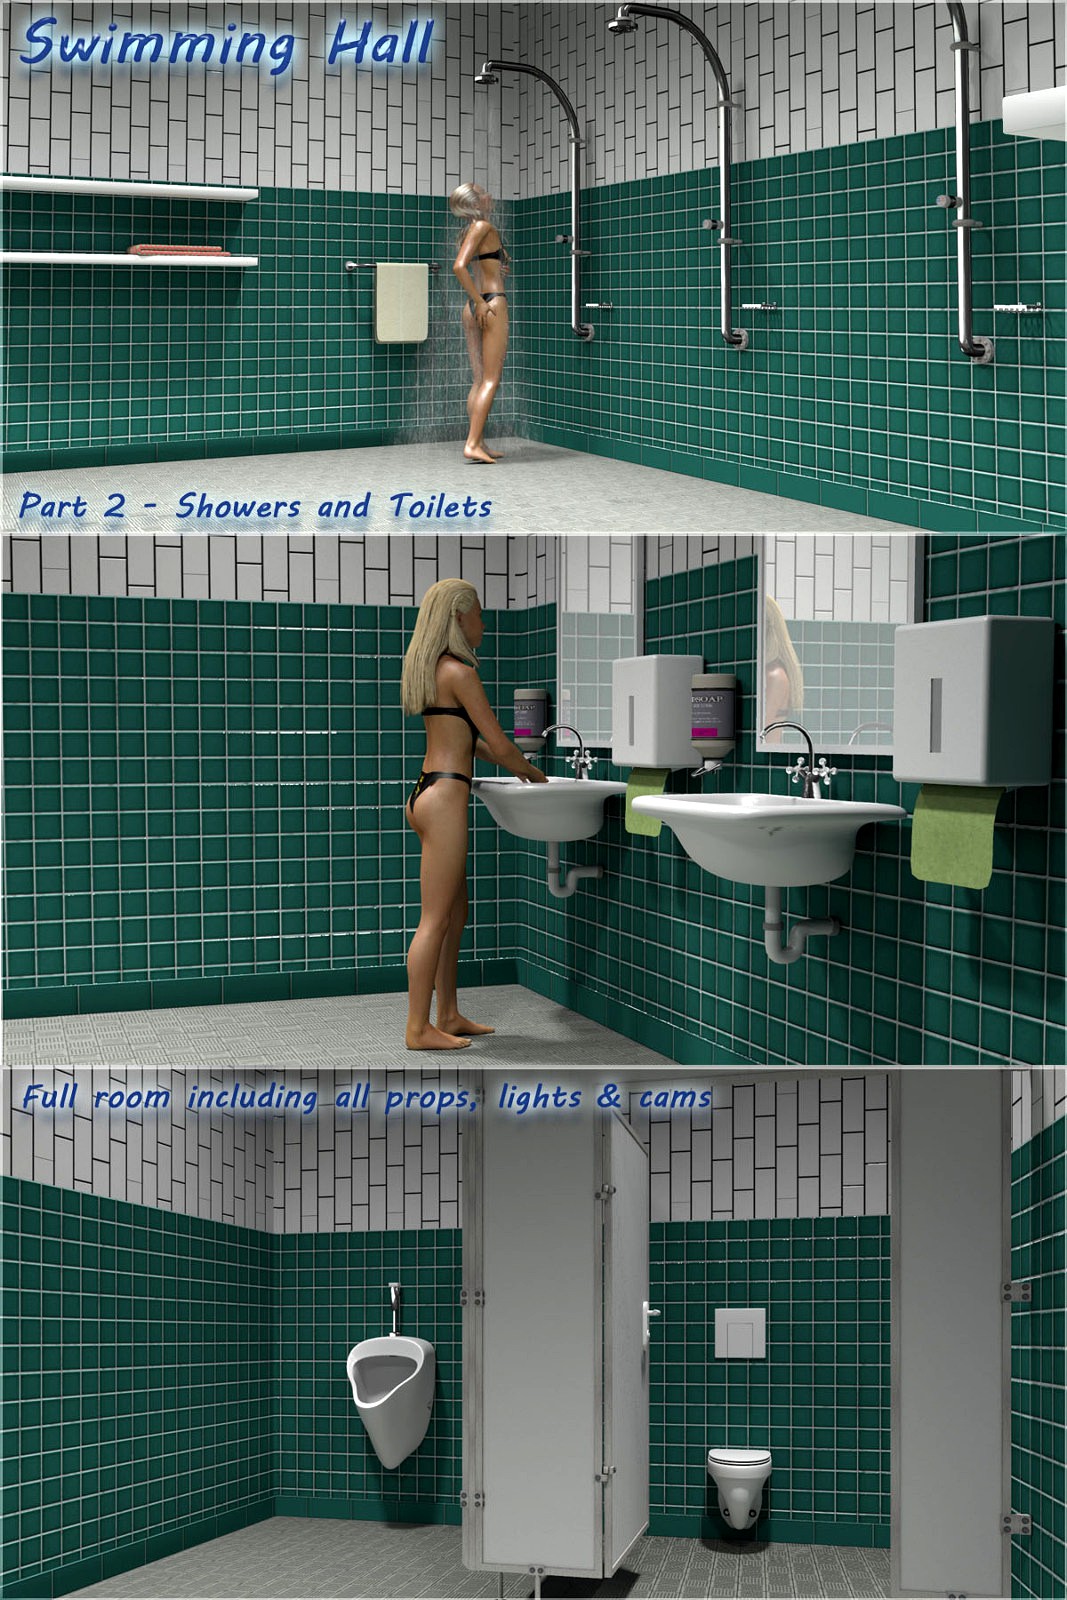 Swimming Hall Part 2 - Toilets and Showers - Extended License